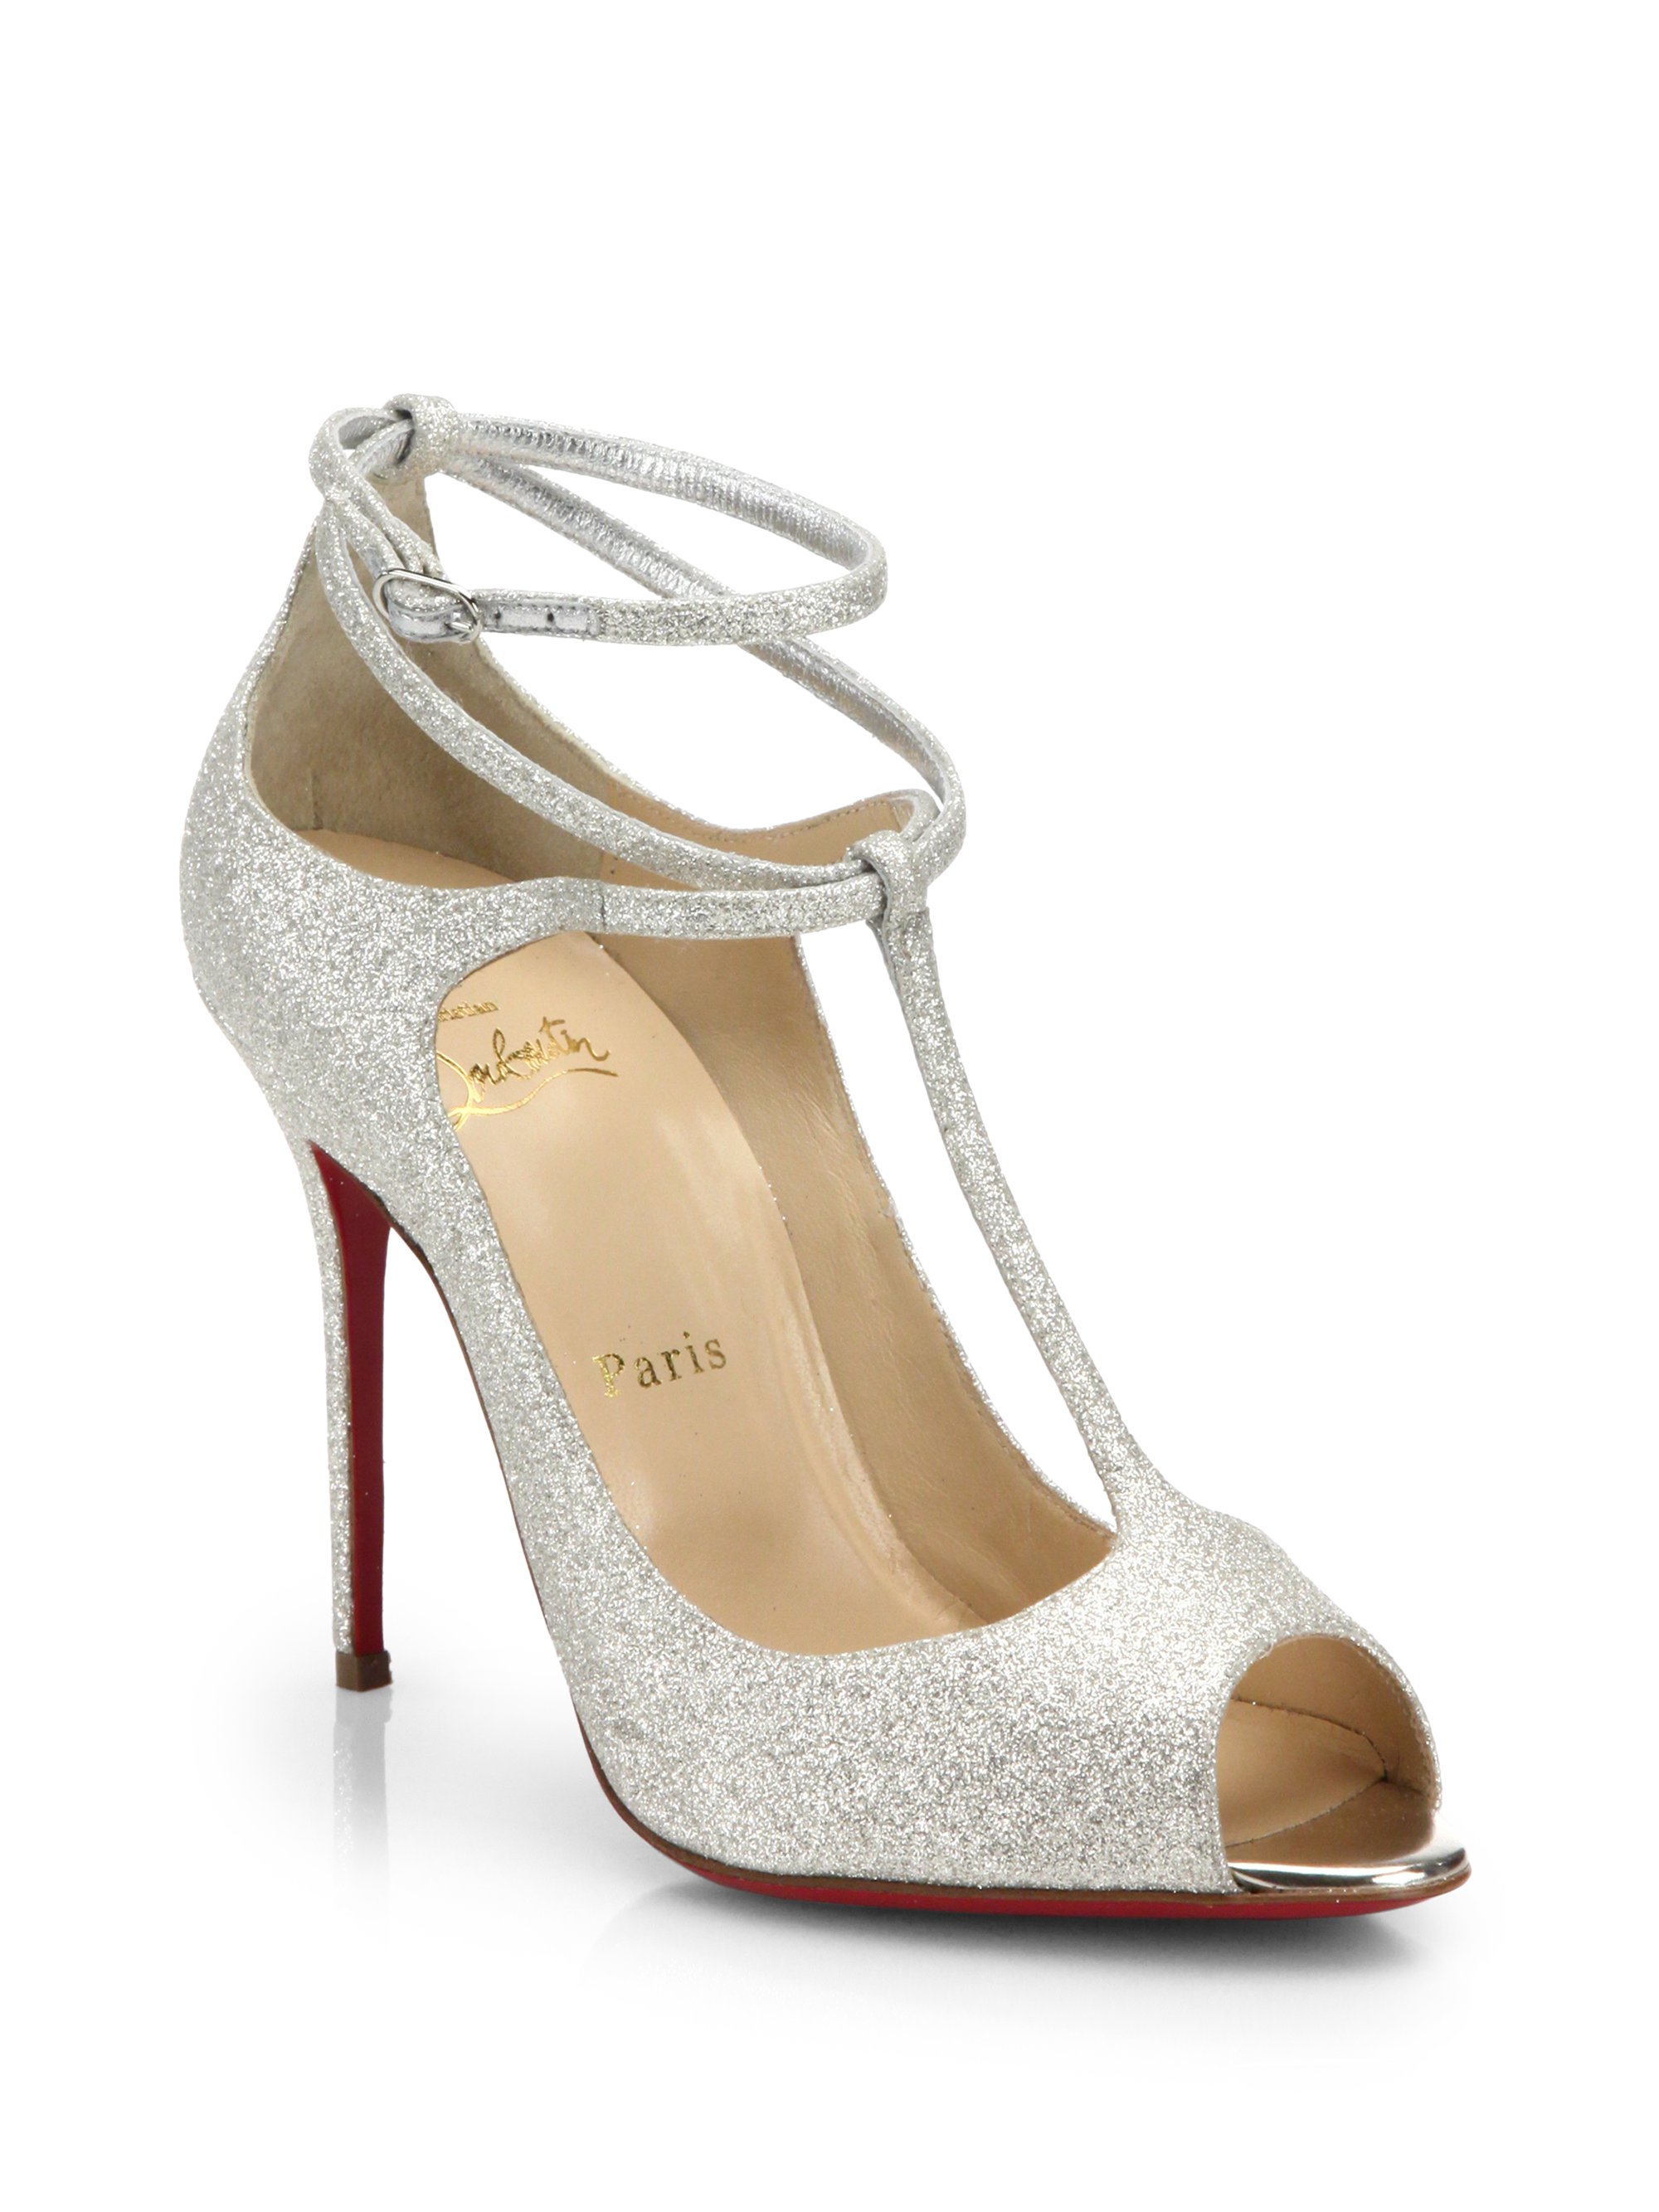 replicas shoes - Christian louboutin Talitha Glitter T-strap Pumps in Silver | Lyst